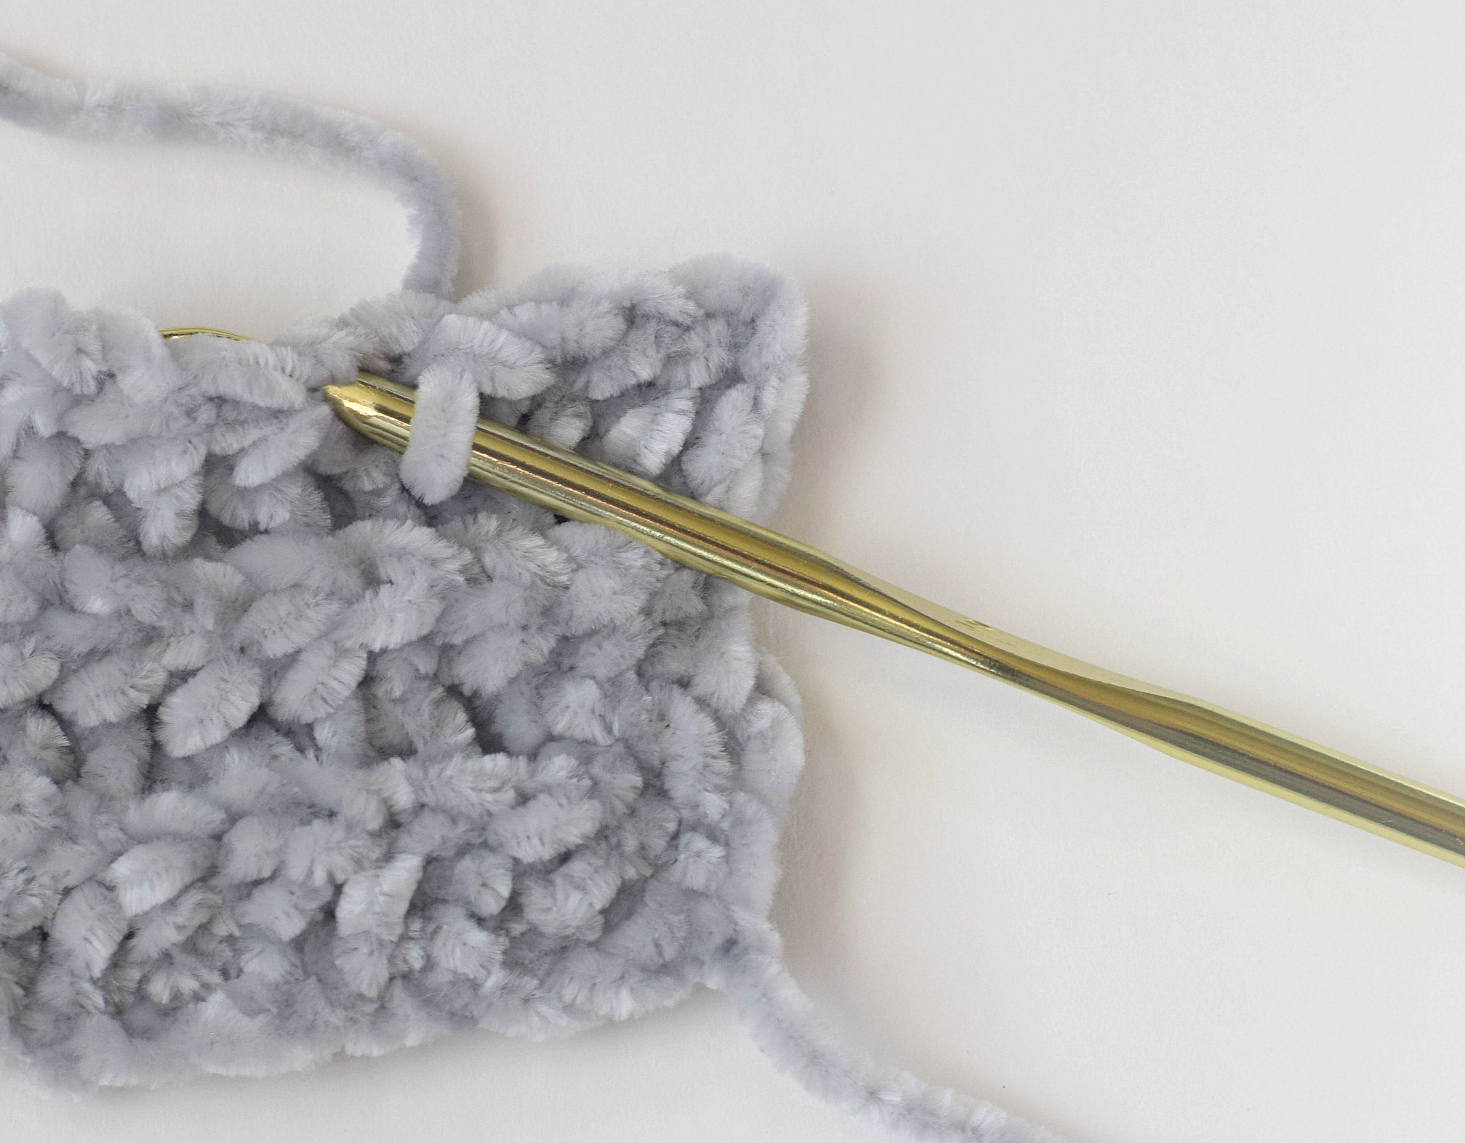 All right people, how many of you use stitch markers? I started using them  last year and I feel like I leveled up lol : r/crochet